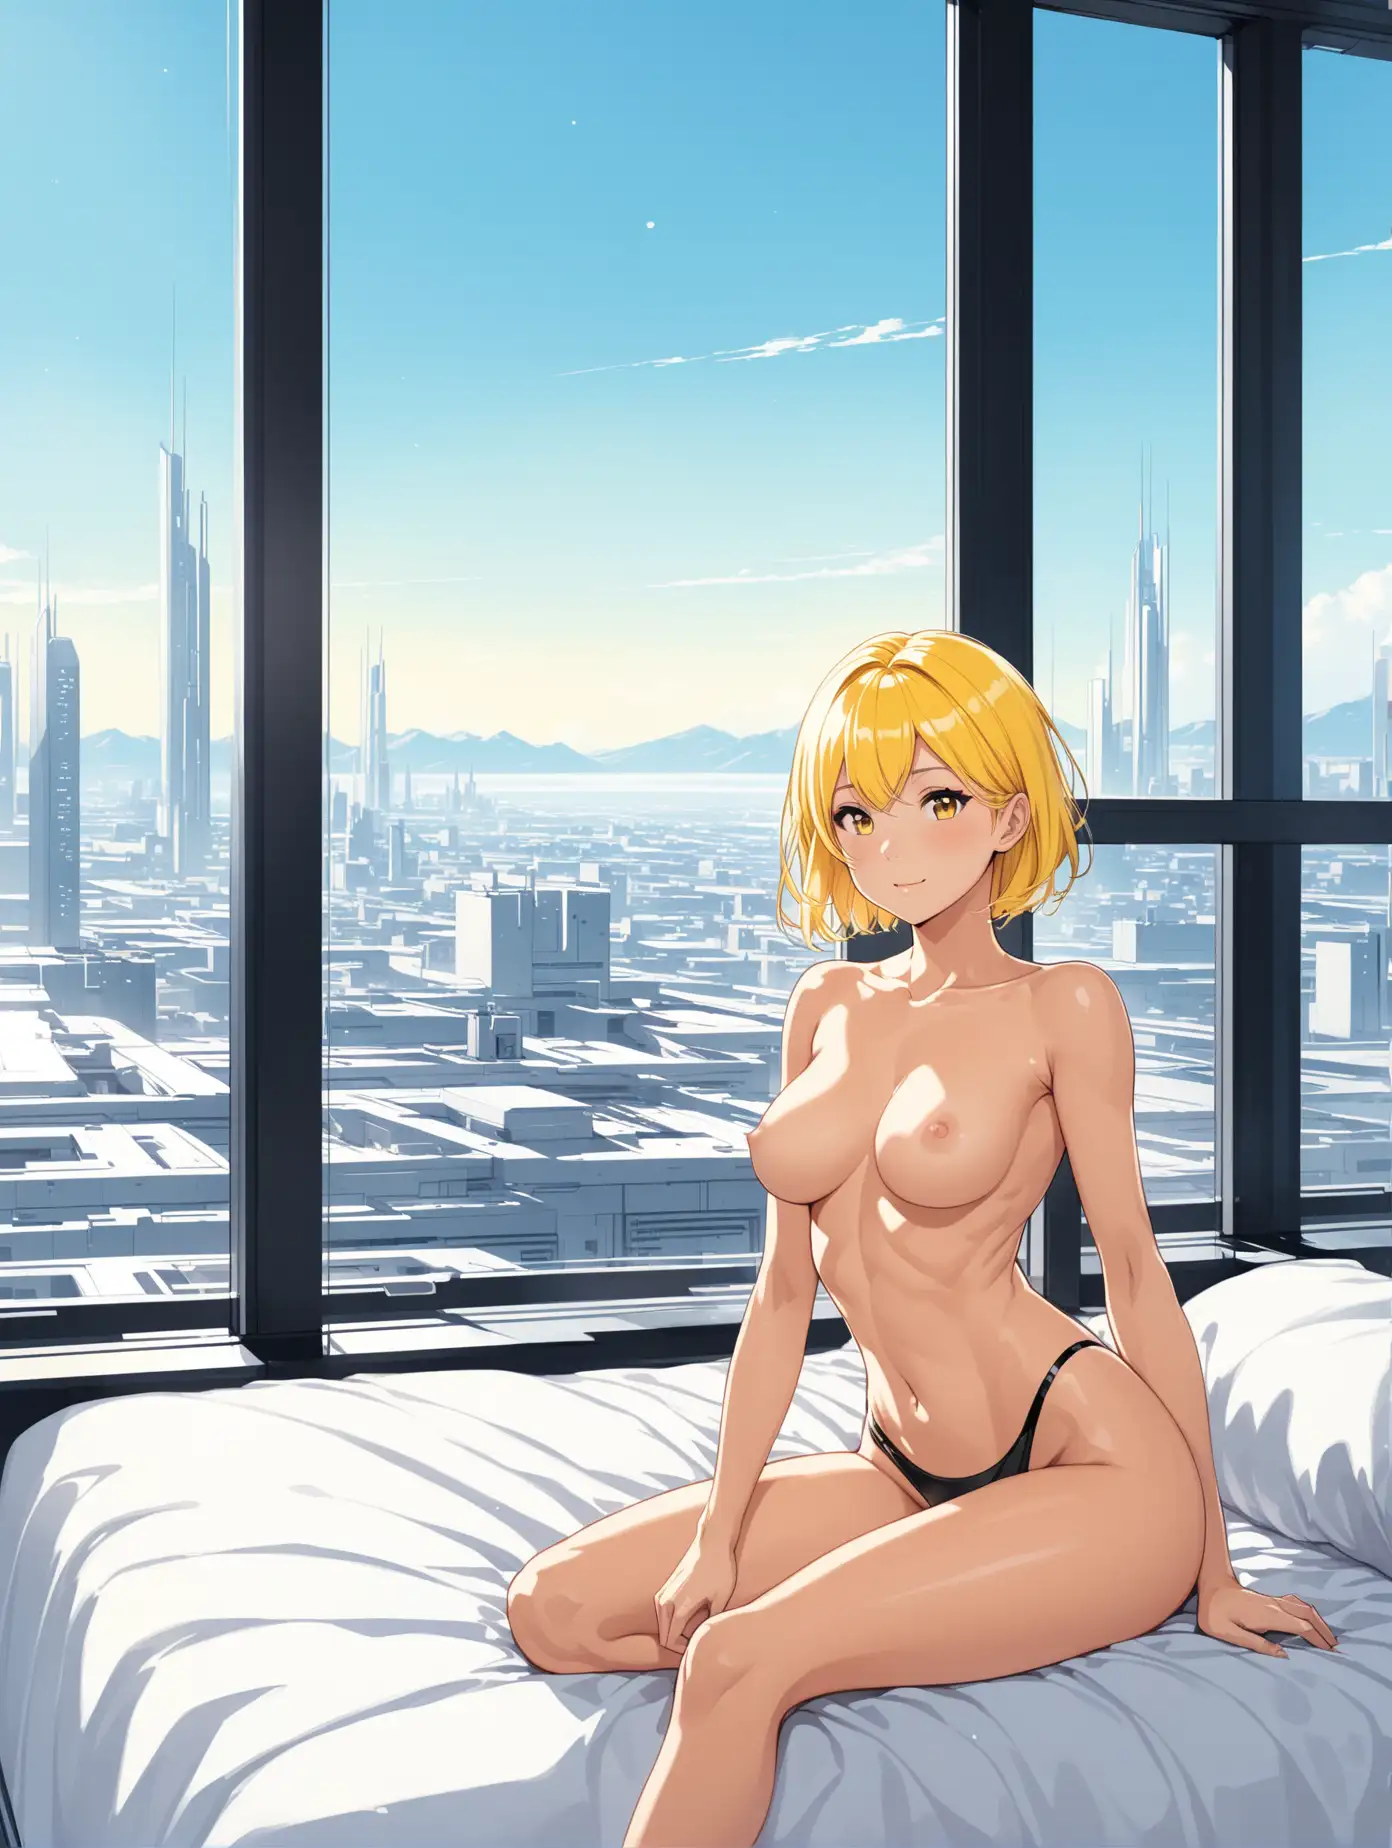 Futuristic Heroine Relaxing in Minimalist Apartment Overlooking Cityscape